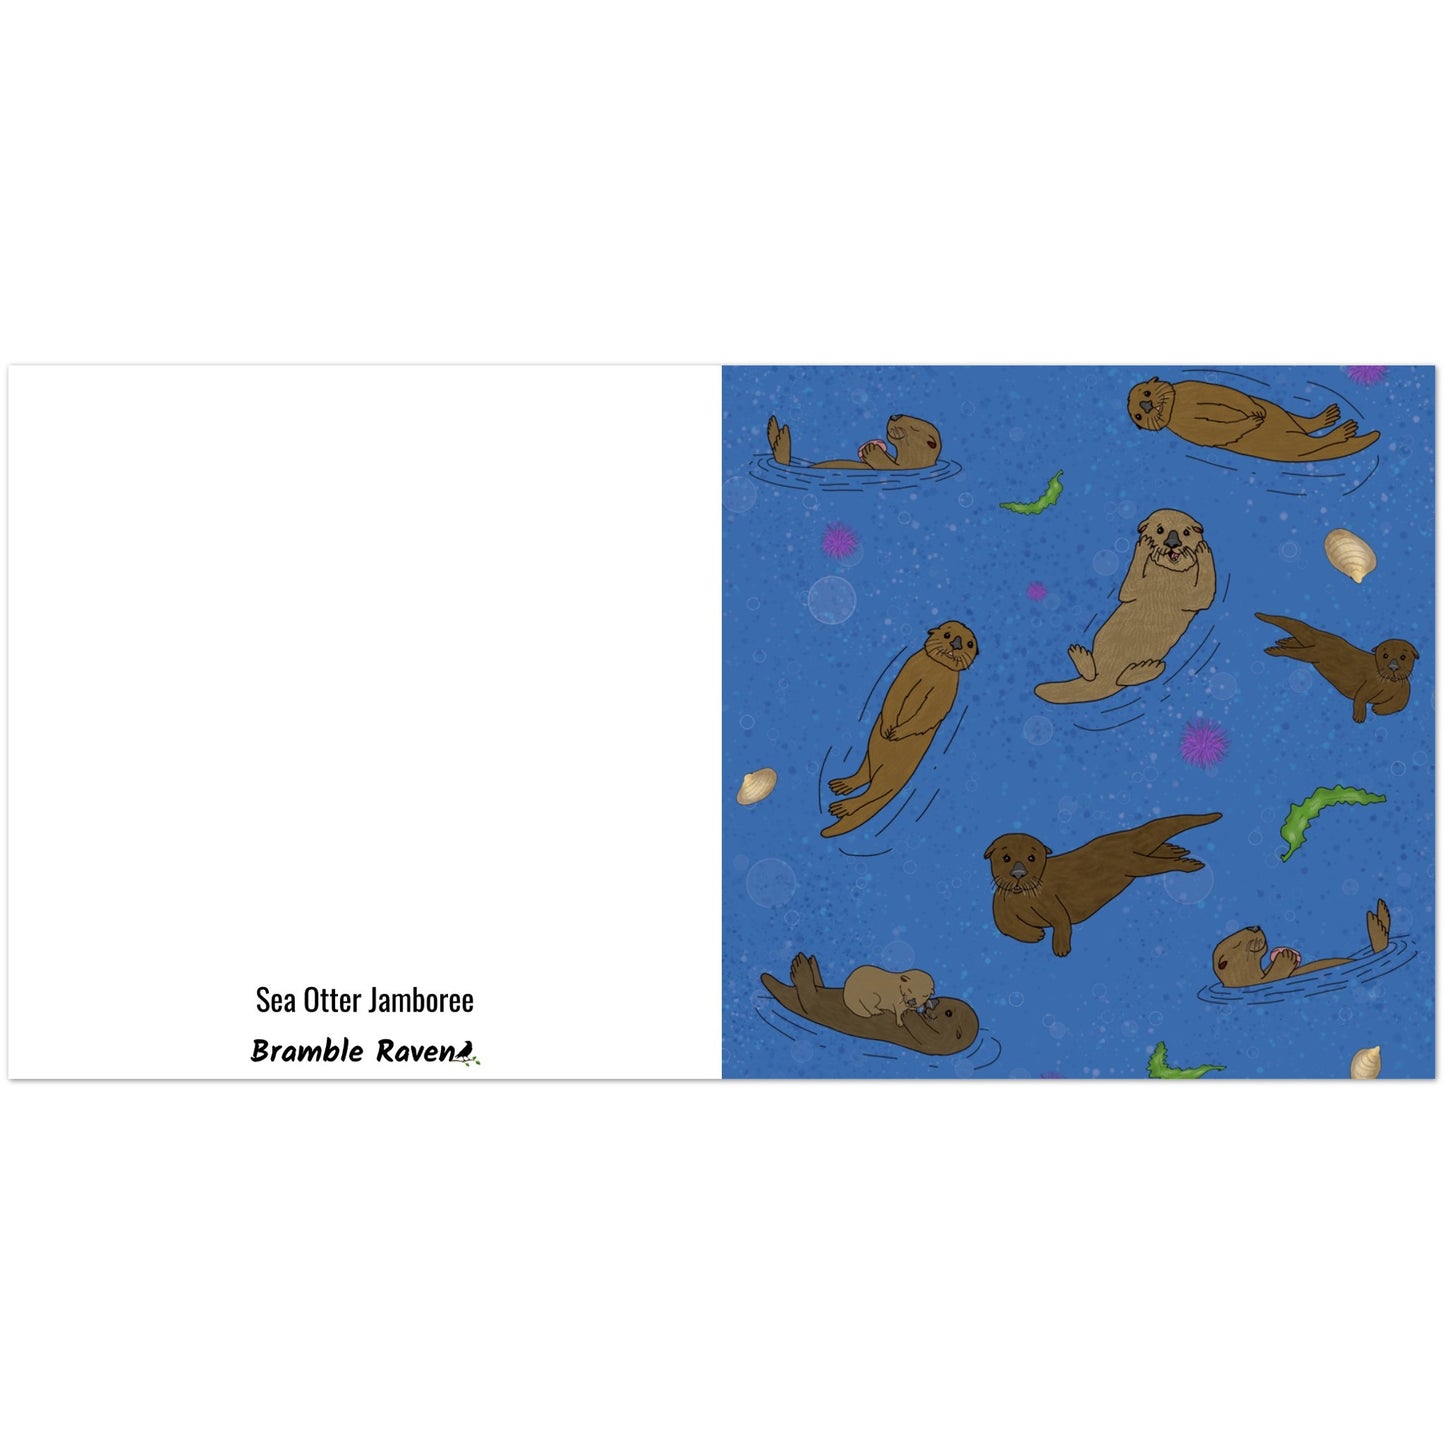 Pack of ten 5.25 x 5.25 inch greeting cards. Features illustrated sea otters on the front. Inside is blank. Made of coated paperboard. Comes with envelopes.